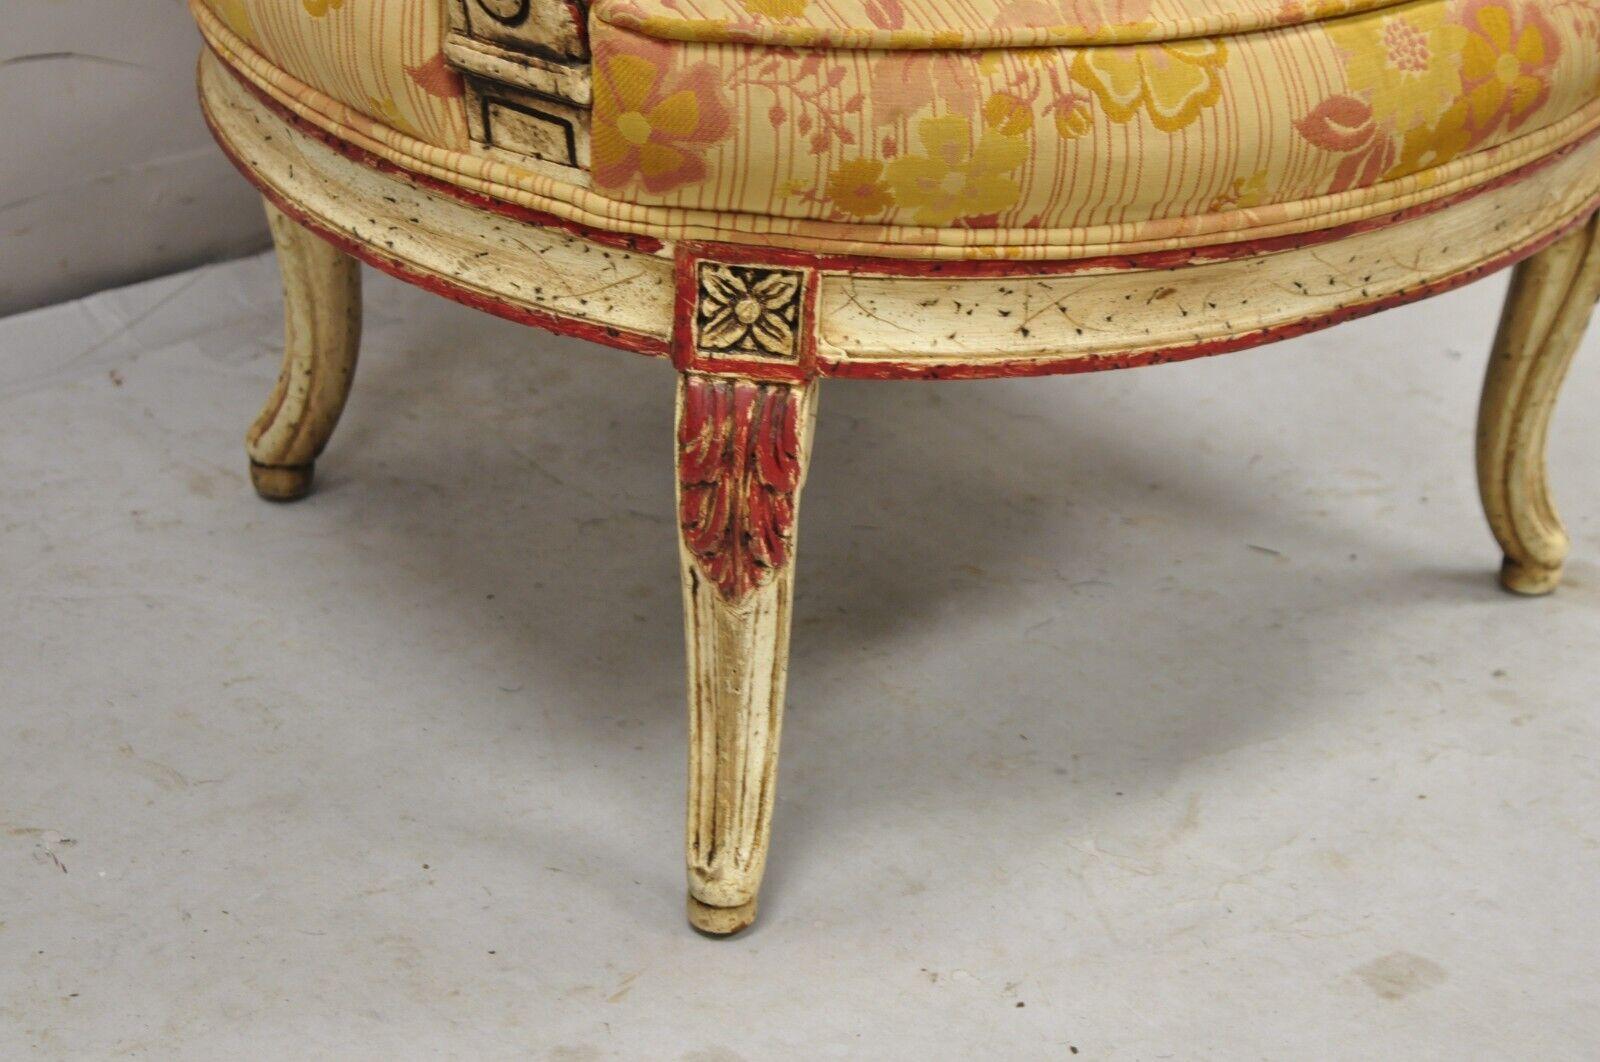 Vintage French Louis XV Style Cream and Red Painted Low Boudoir Fauteuil Chair For Sale 2